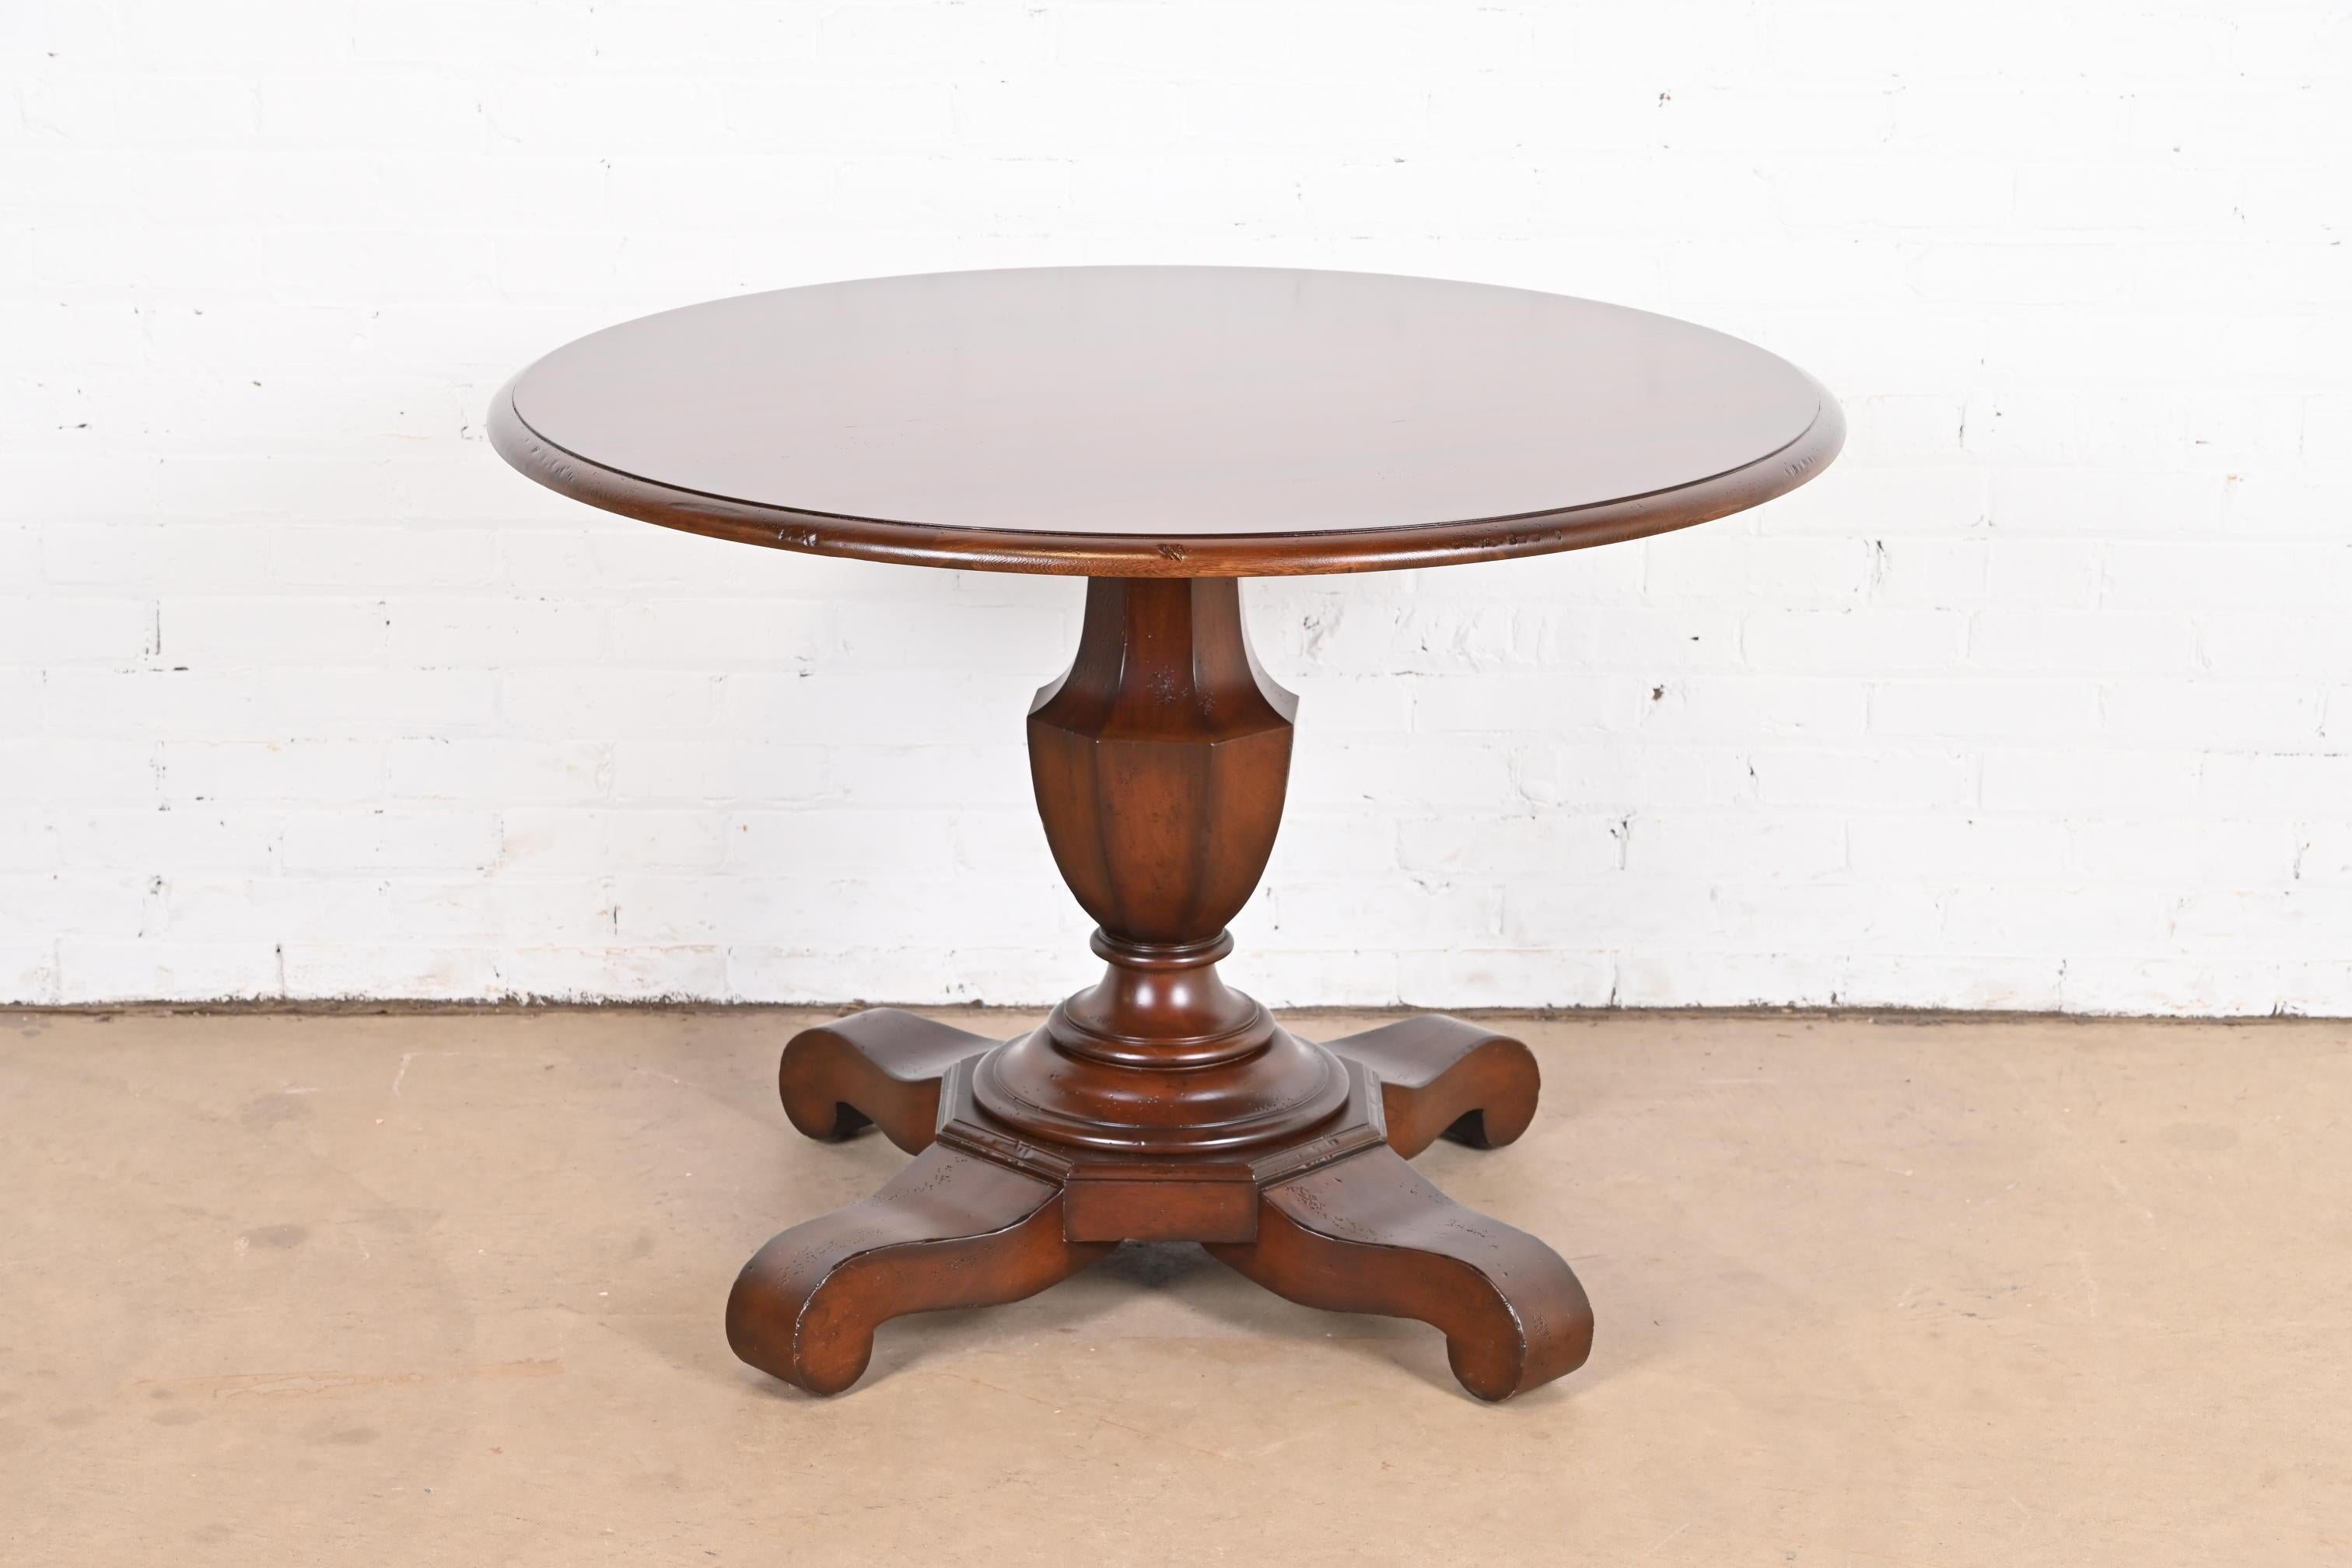 A gorgeous Empire style carved mahogany pedestal tea table, dining table, or center table

By Baker Furniture, 